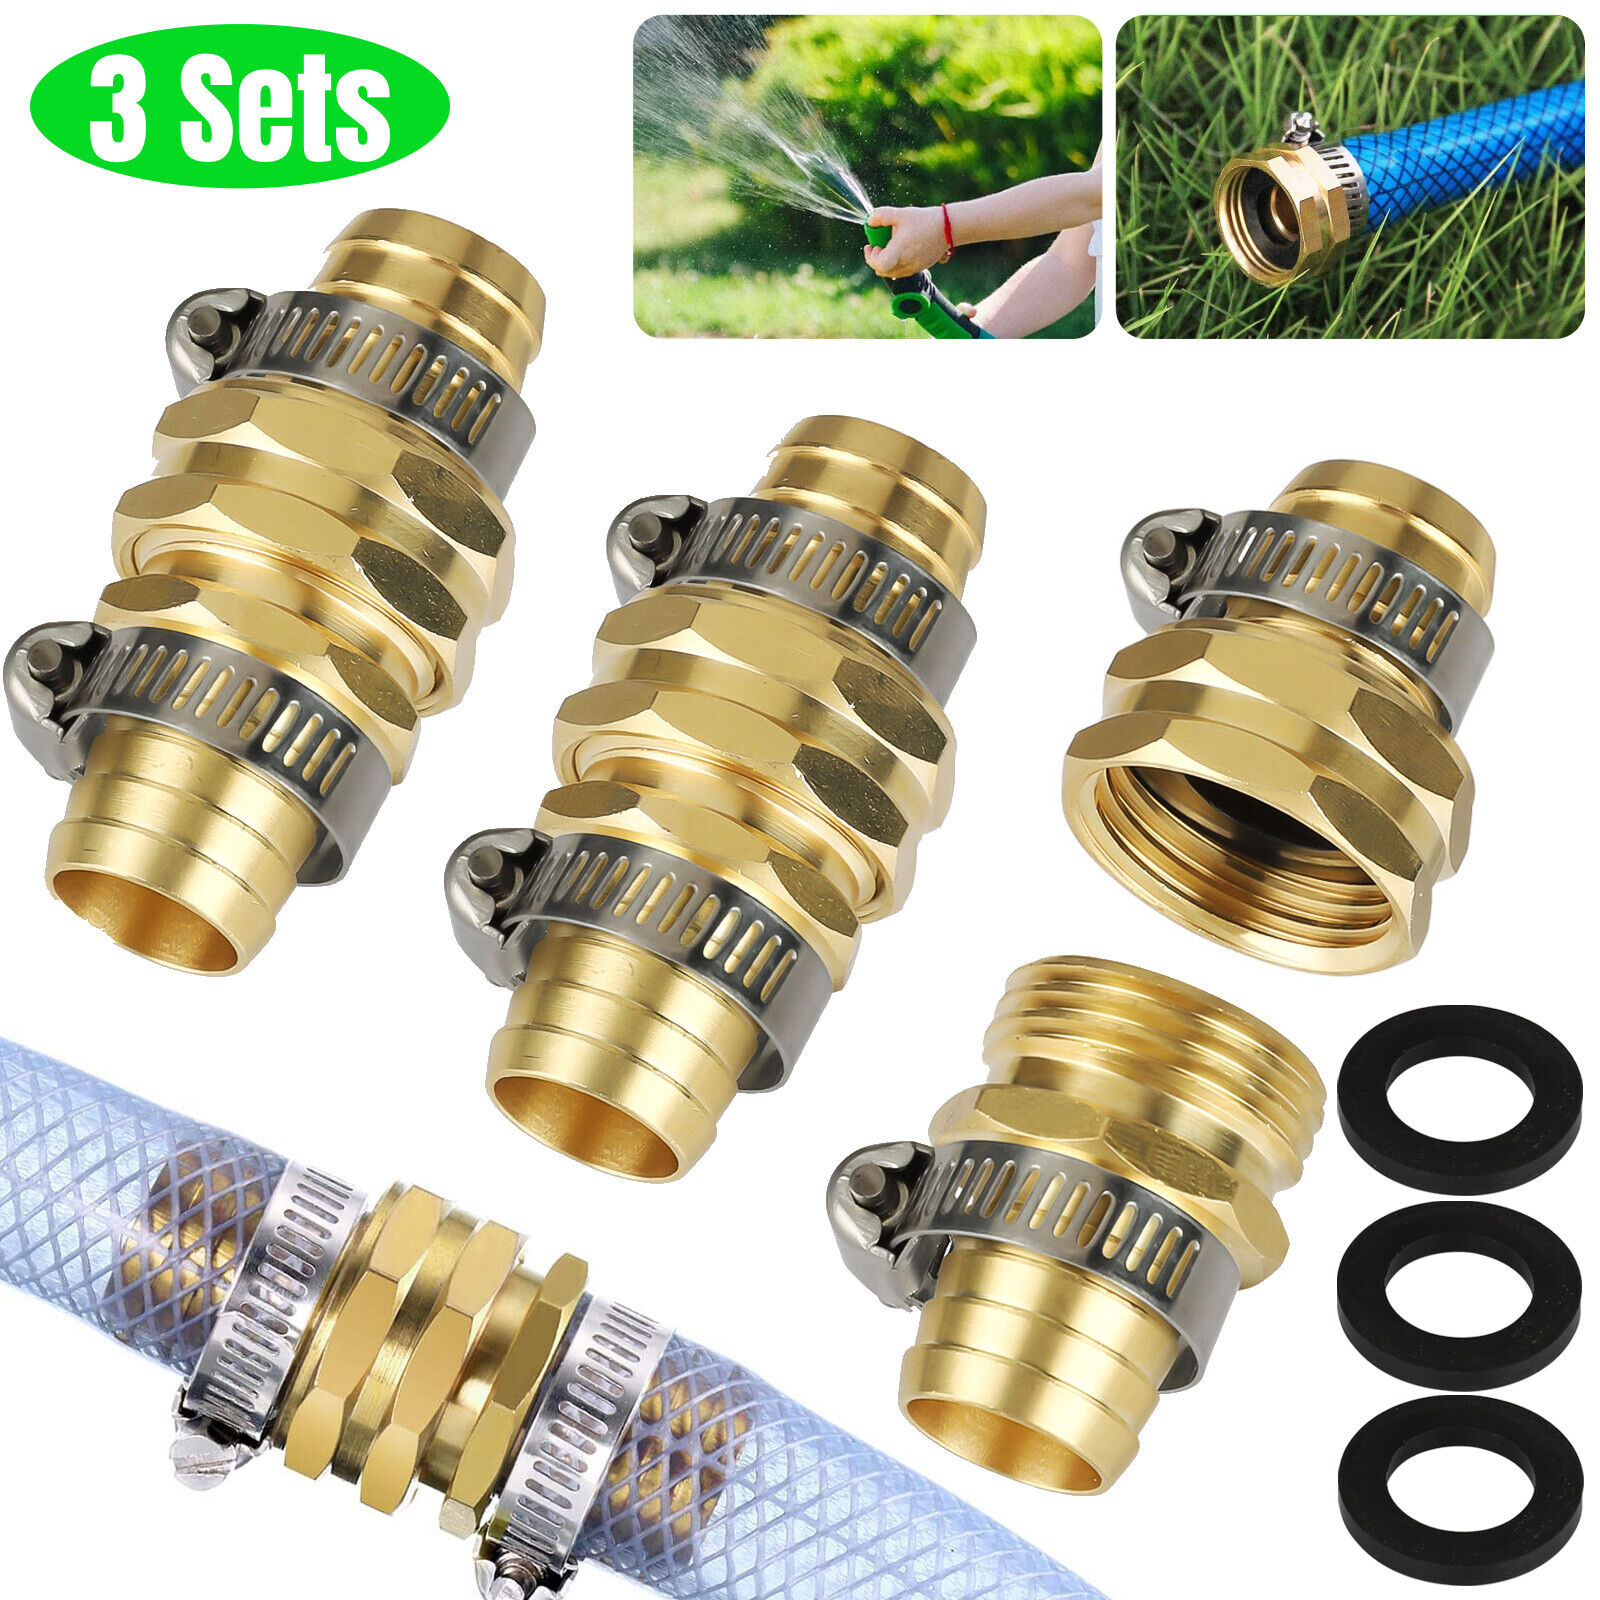 Brass Garden Hose Connector with Stainless Steel Clamps, Male and Female  Garden Hose Fittings, 3/4 inch, 3 Sets - U.S. Solid